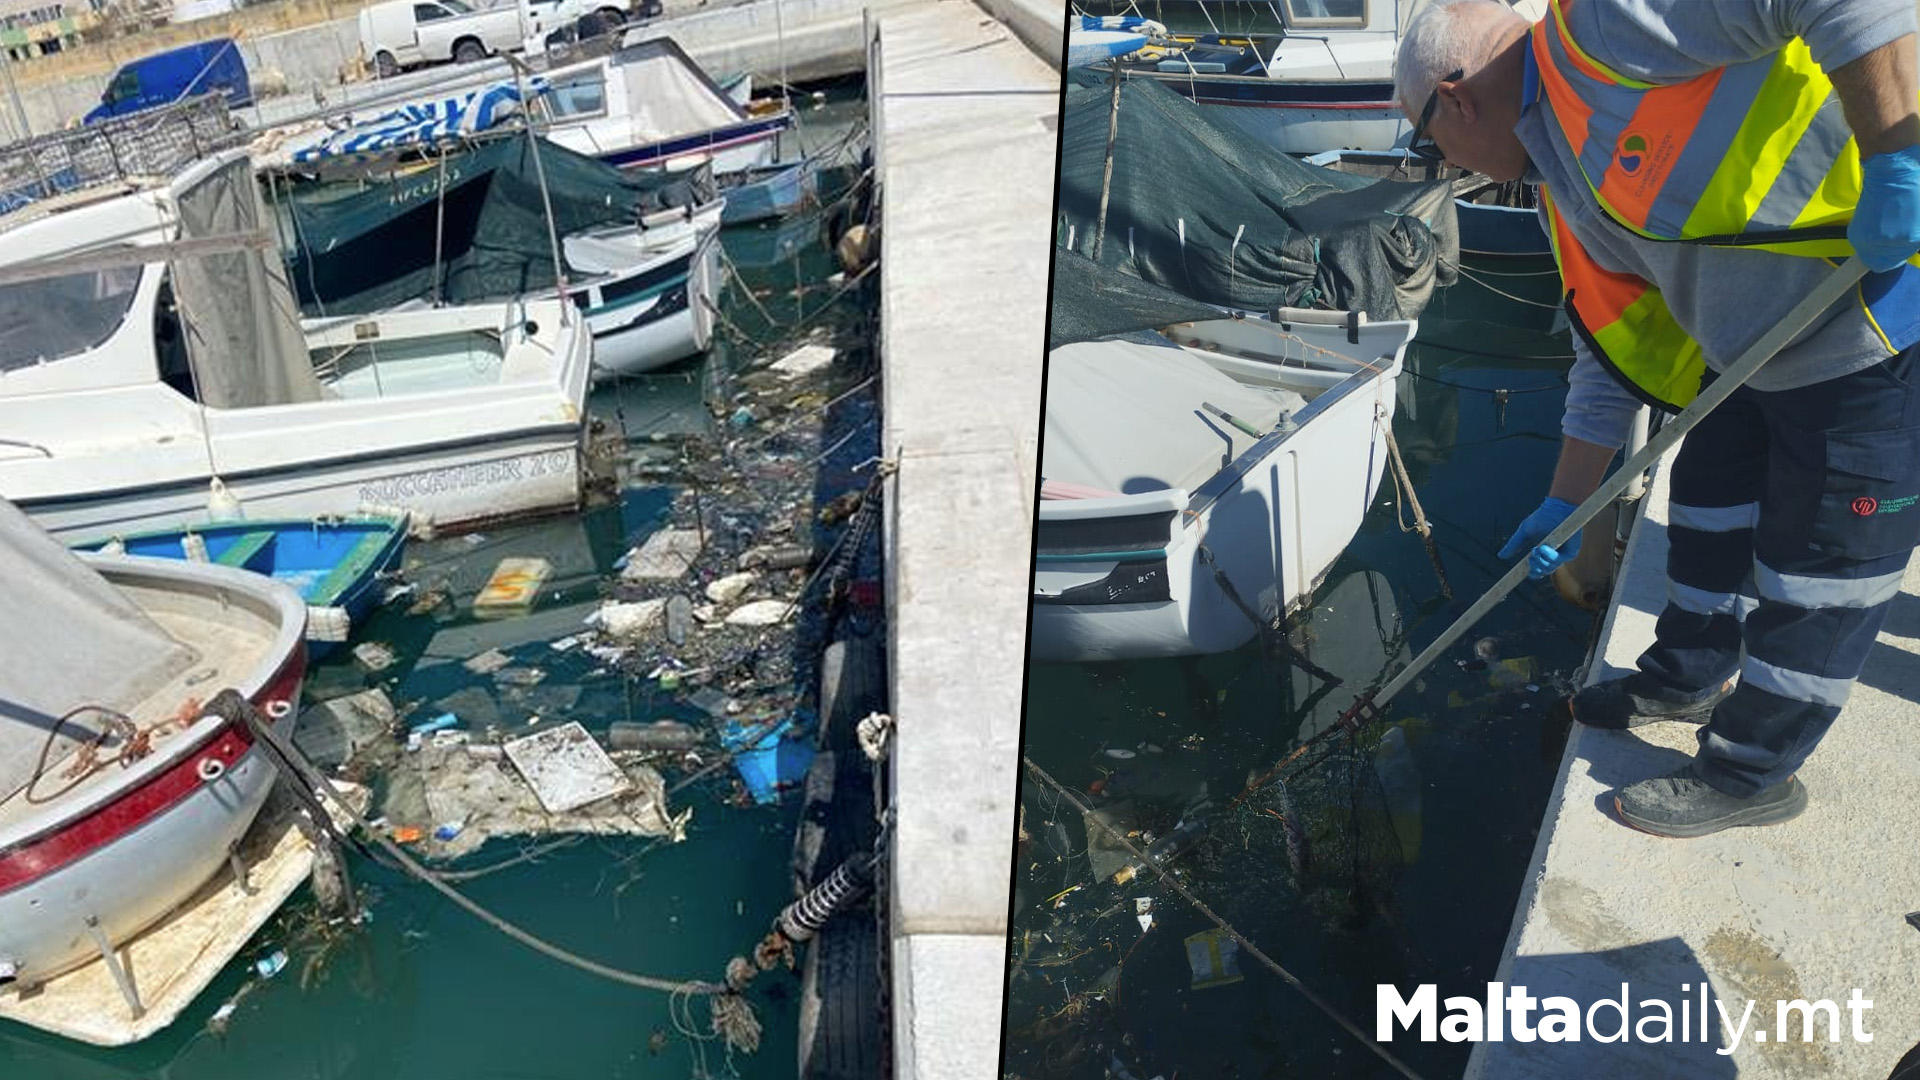 Nature Exposes Us: Clean Malta Urges Better Disposal